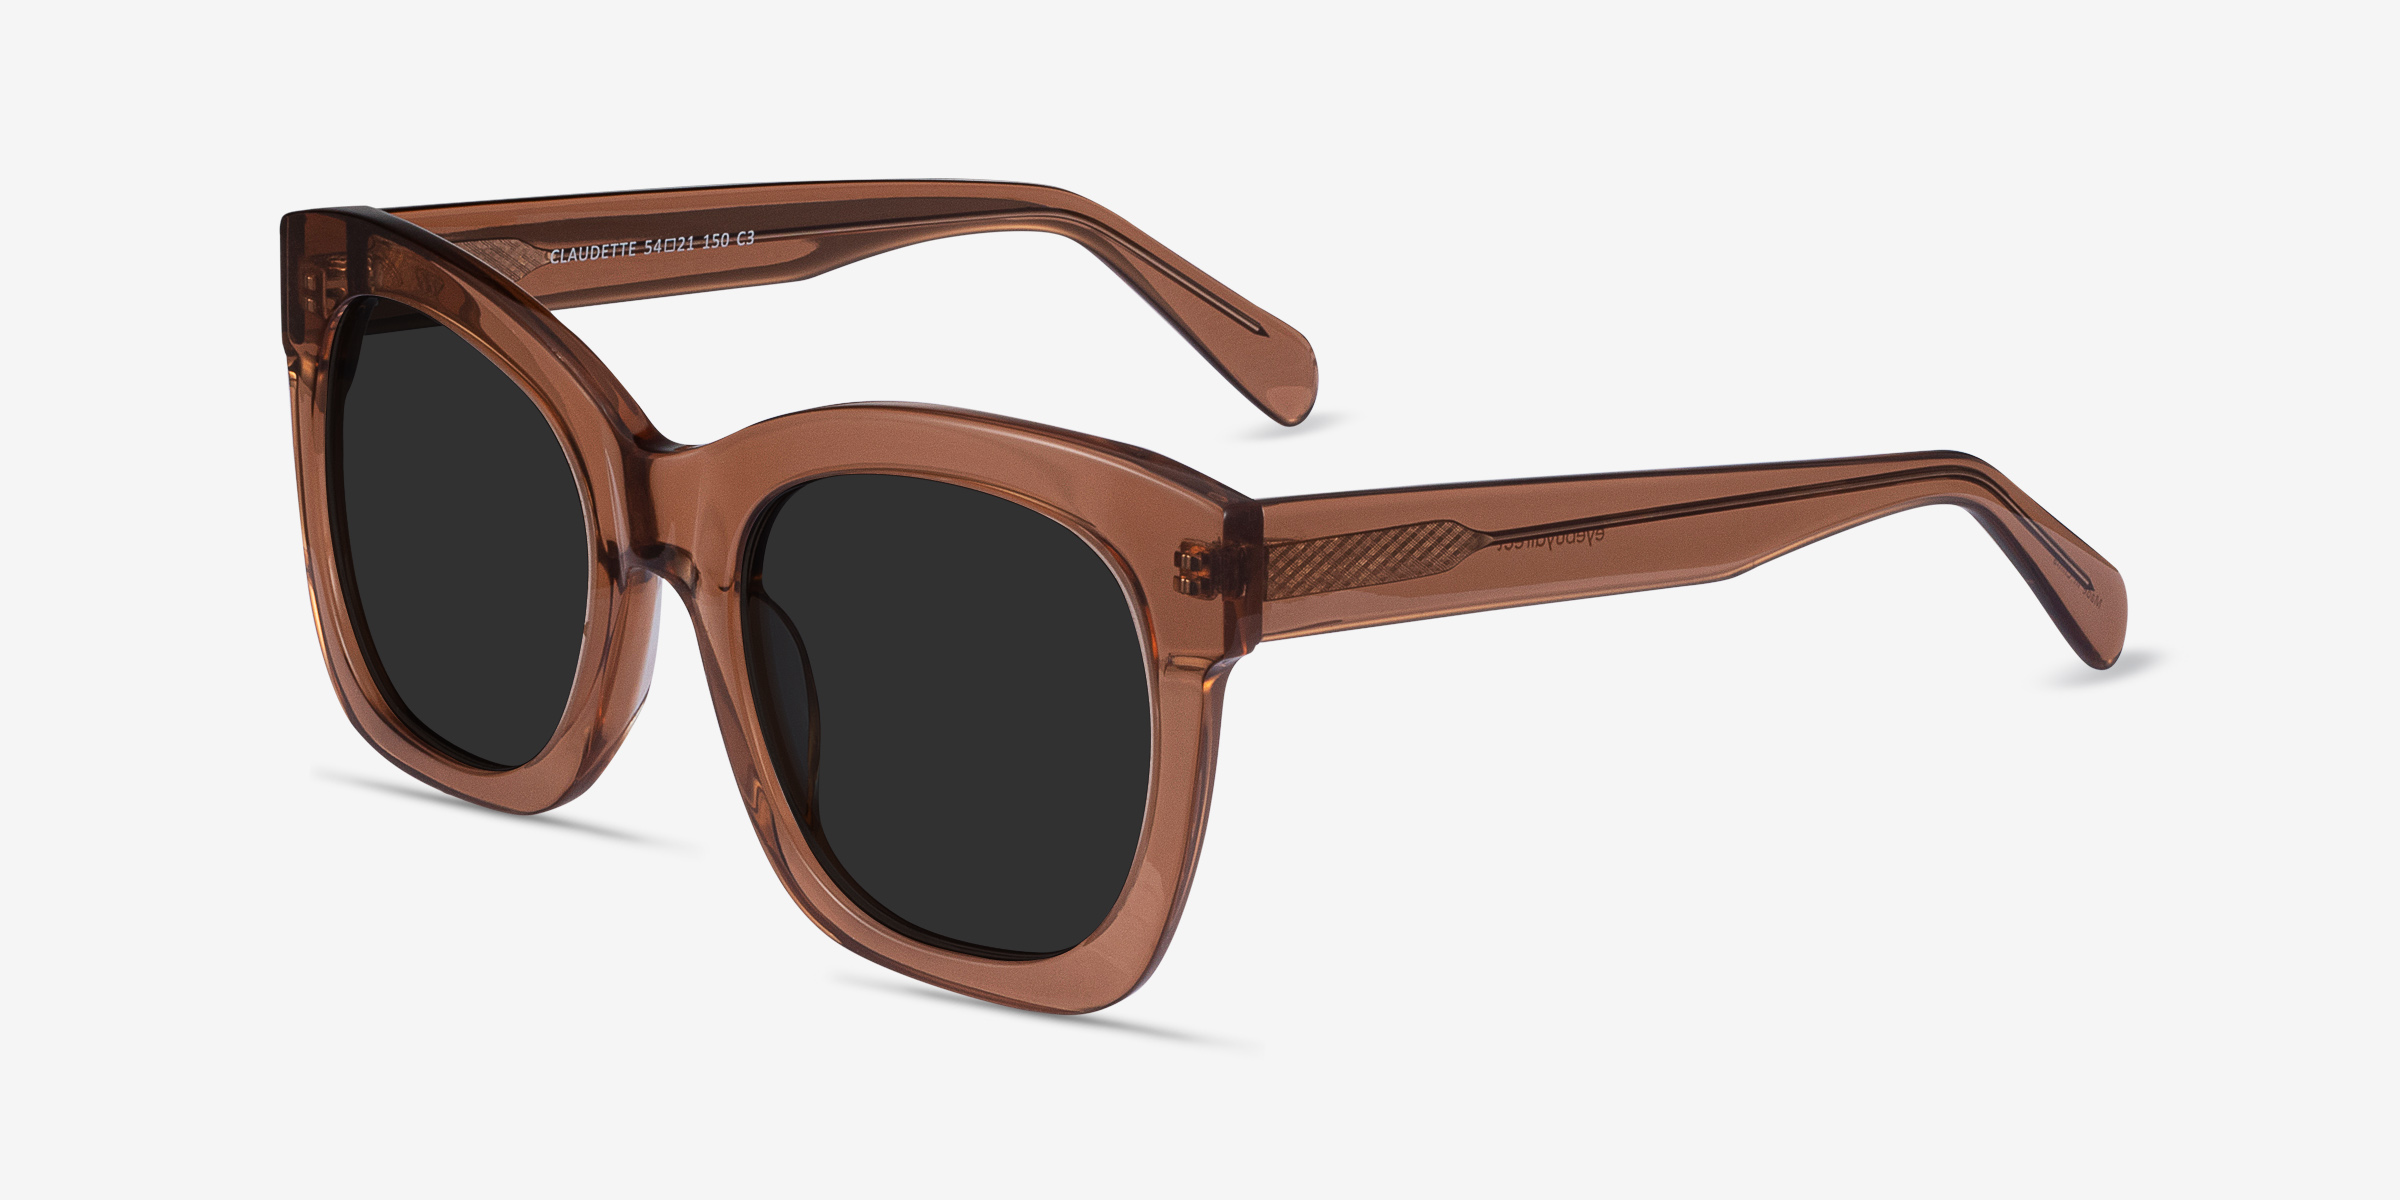 Claudette - Square Clear Brown Frame Sunglasses For Women | Eyebuydirect